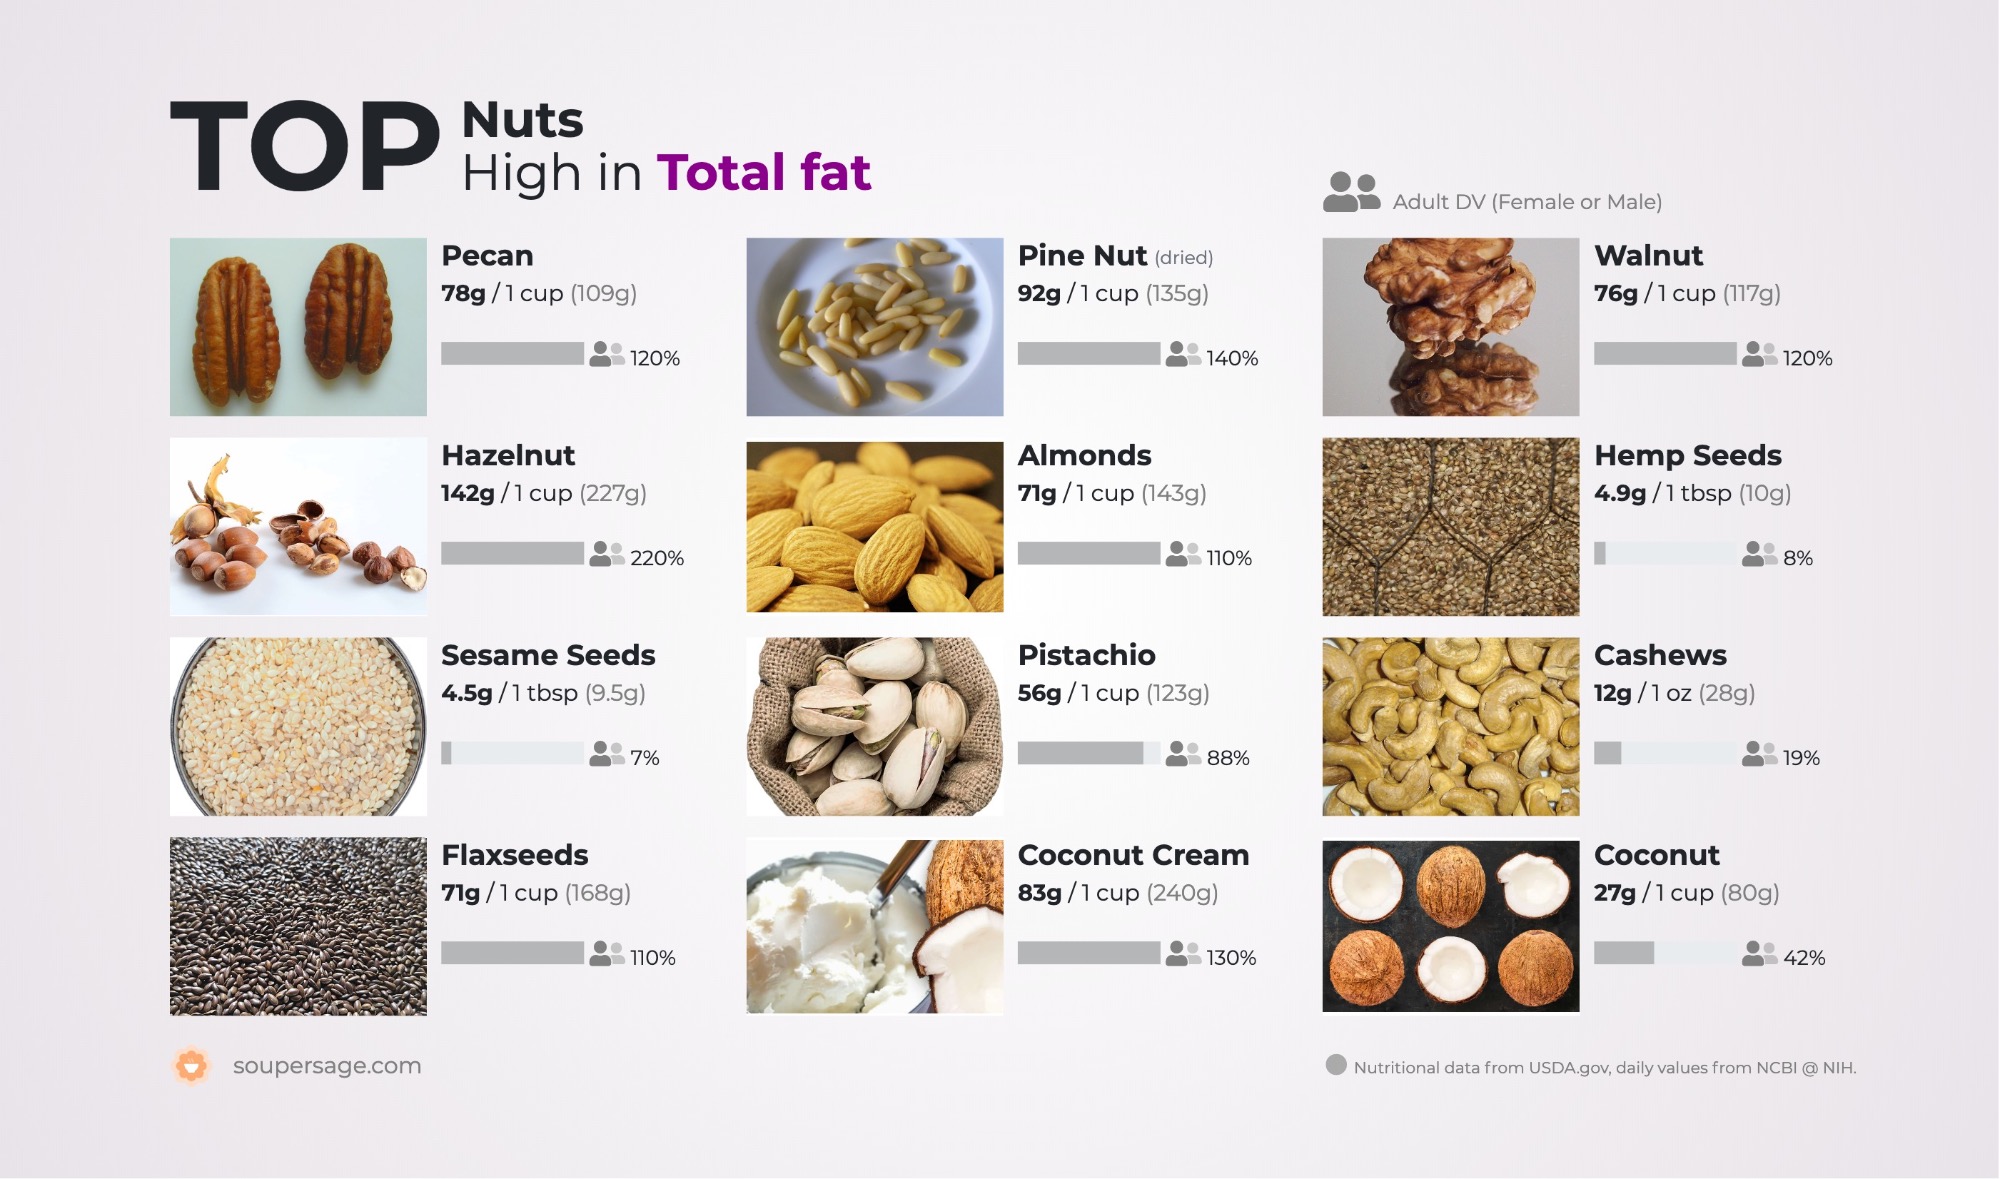 image of Top Nuts High in Total fat